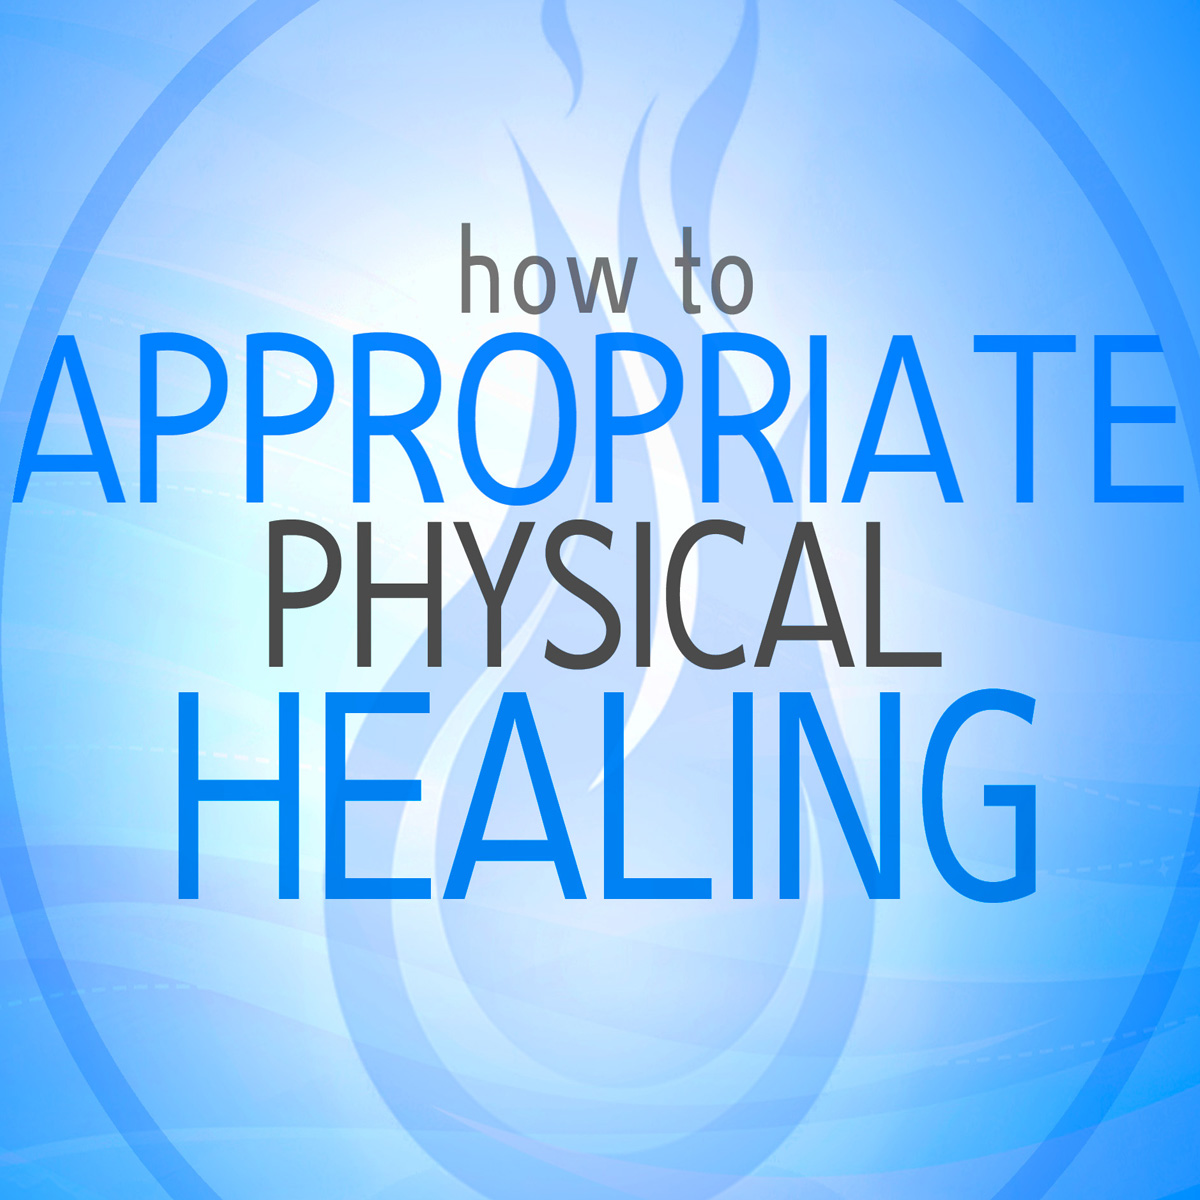 How to Appropriate Physical Healing